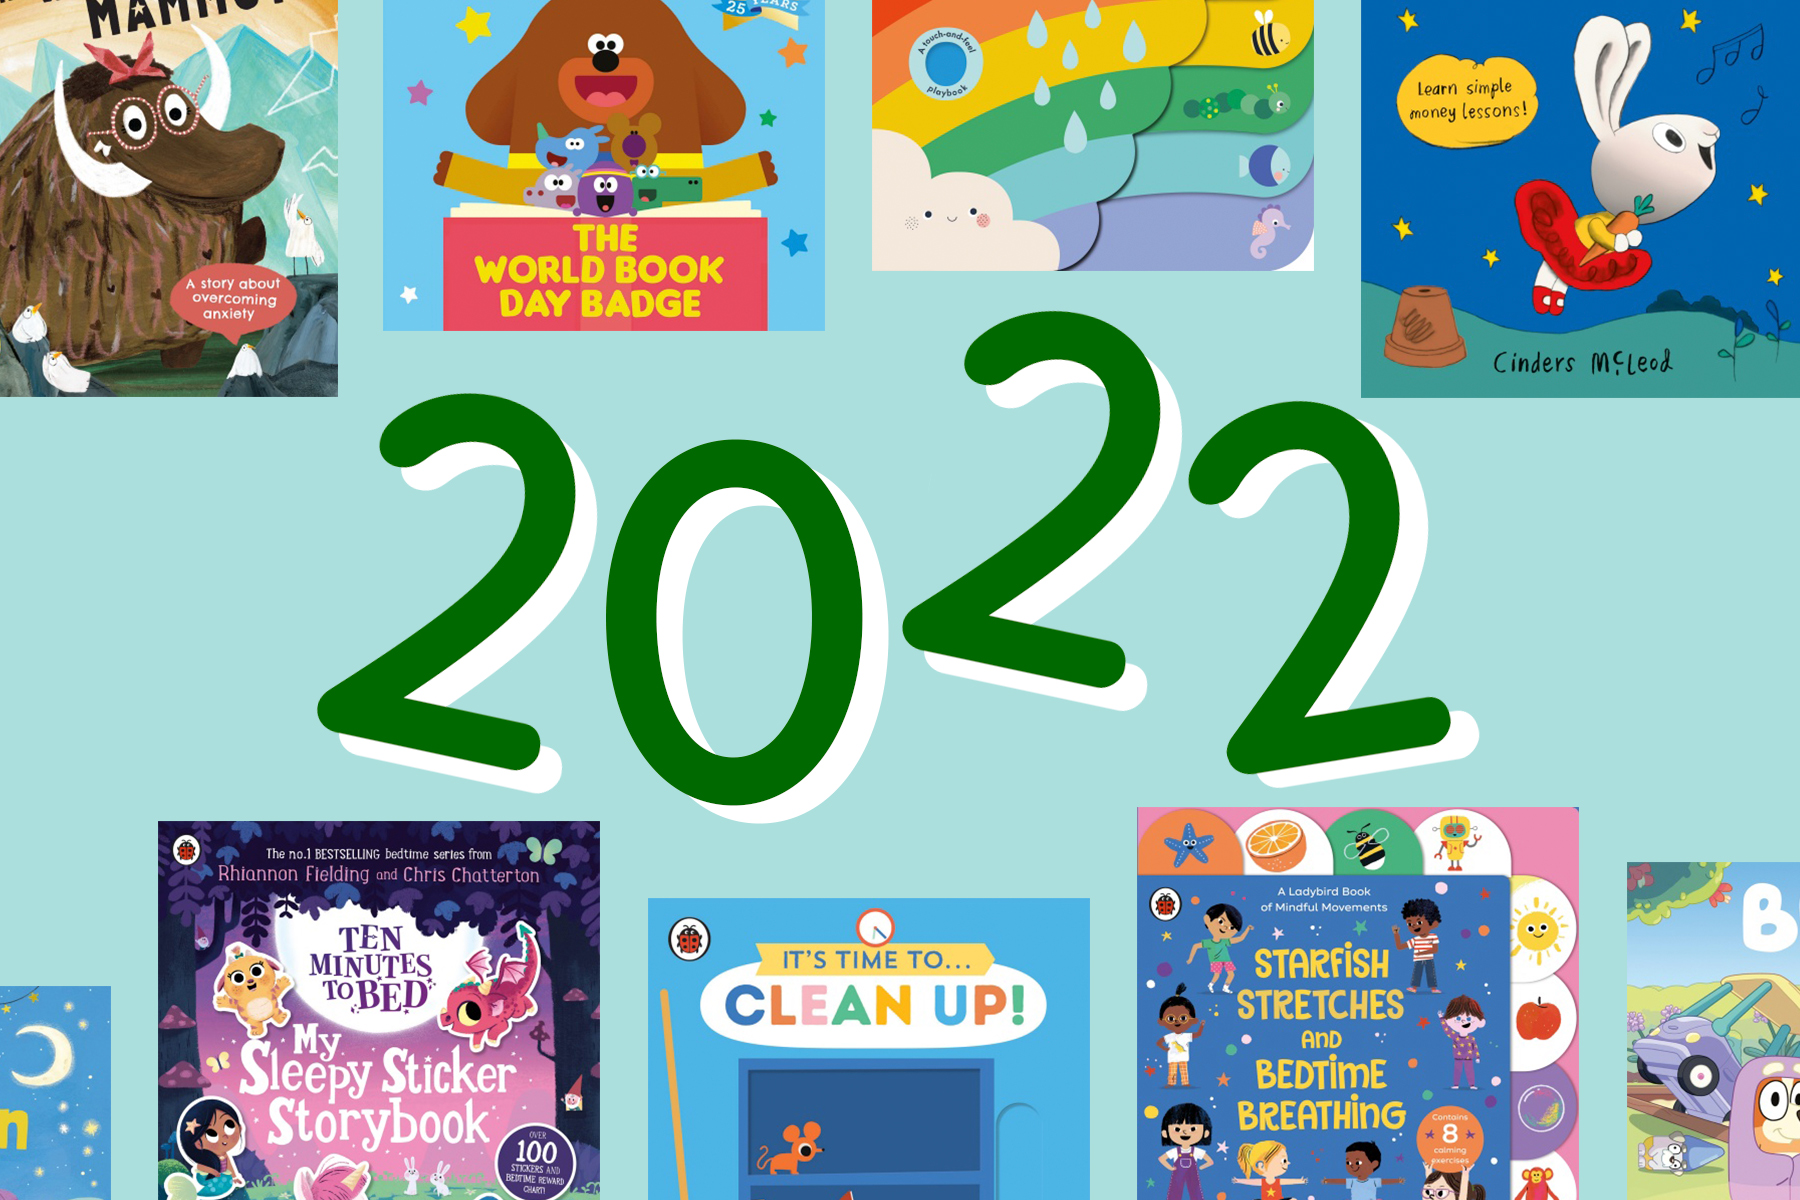 testA picture of a selection of Ladybird books on a light green-blue background surrounding green '2022' lettering